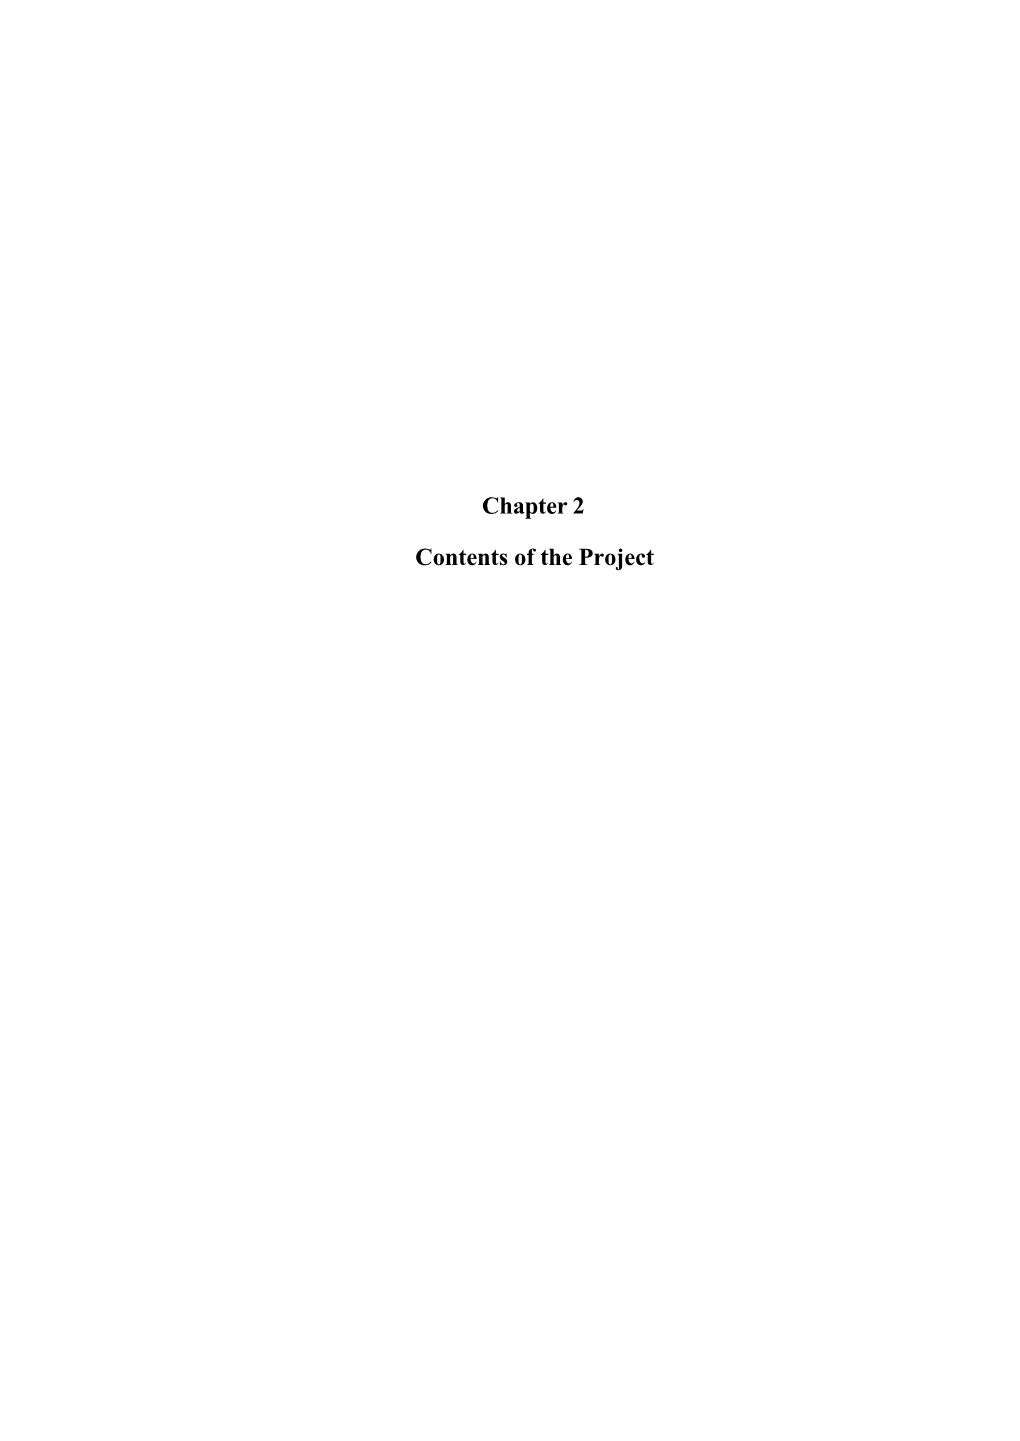 Chapter 2 Contents of the Project